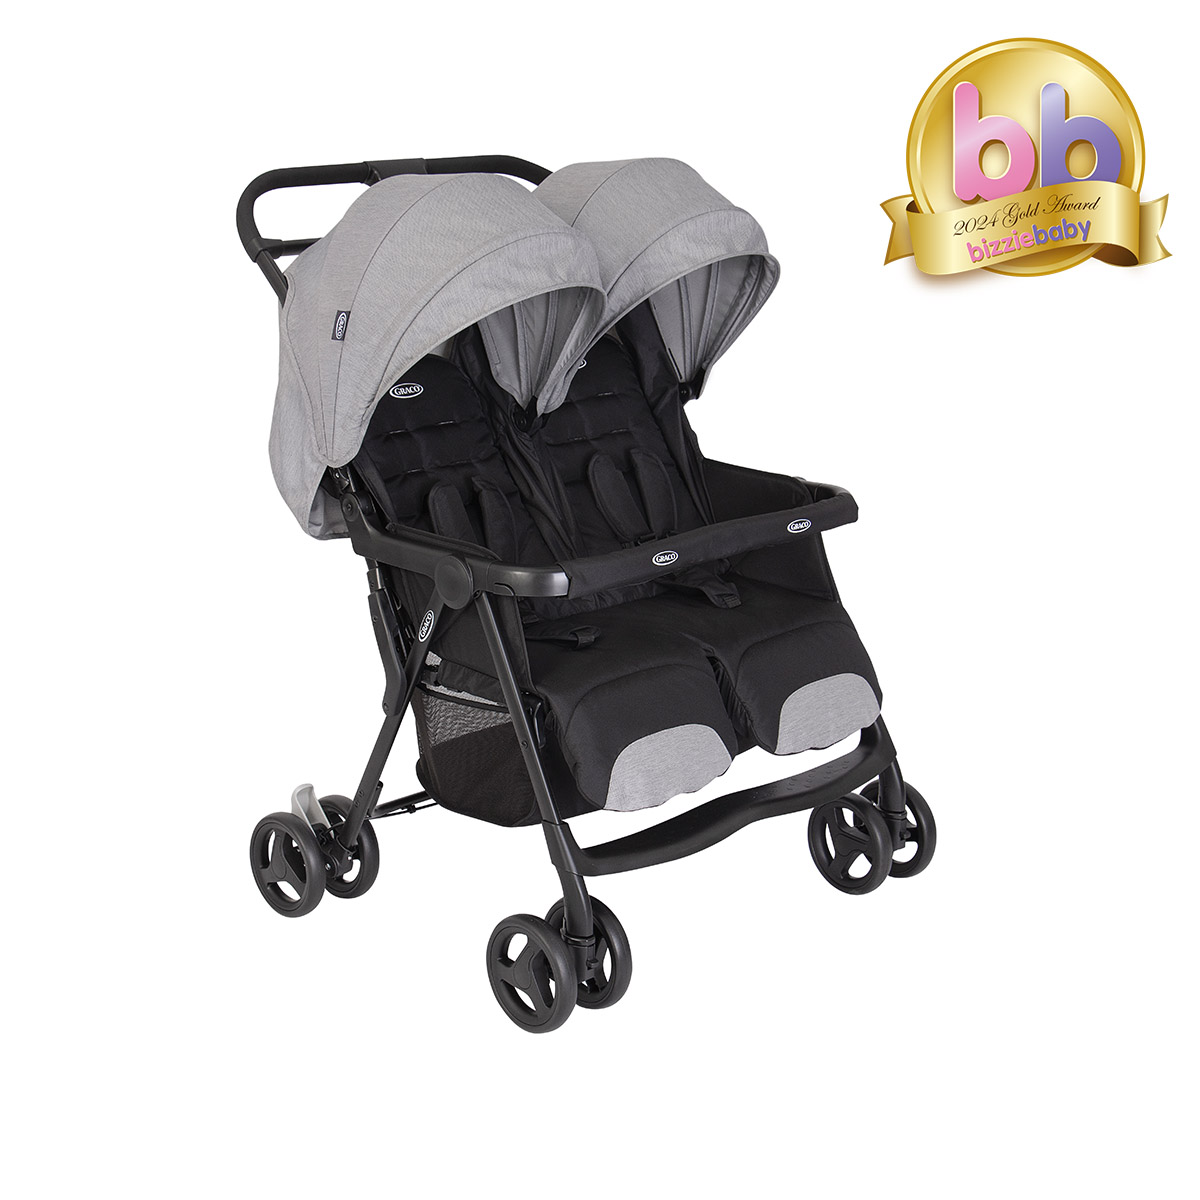 Graco DuoRider double stroller three quarter angle on white background.
